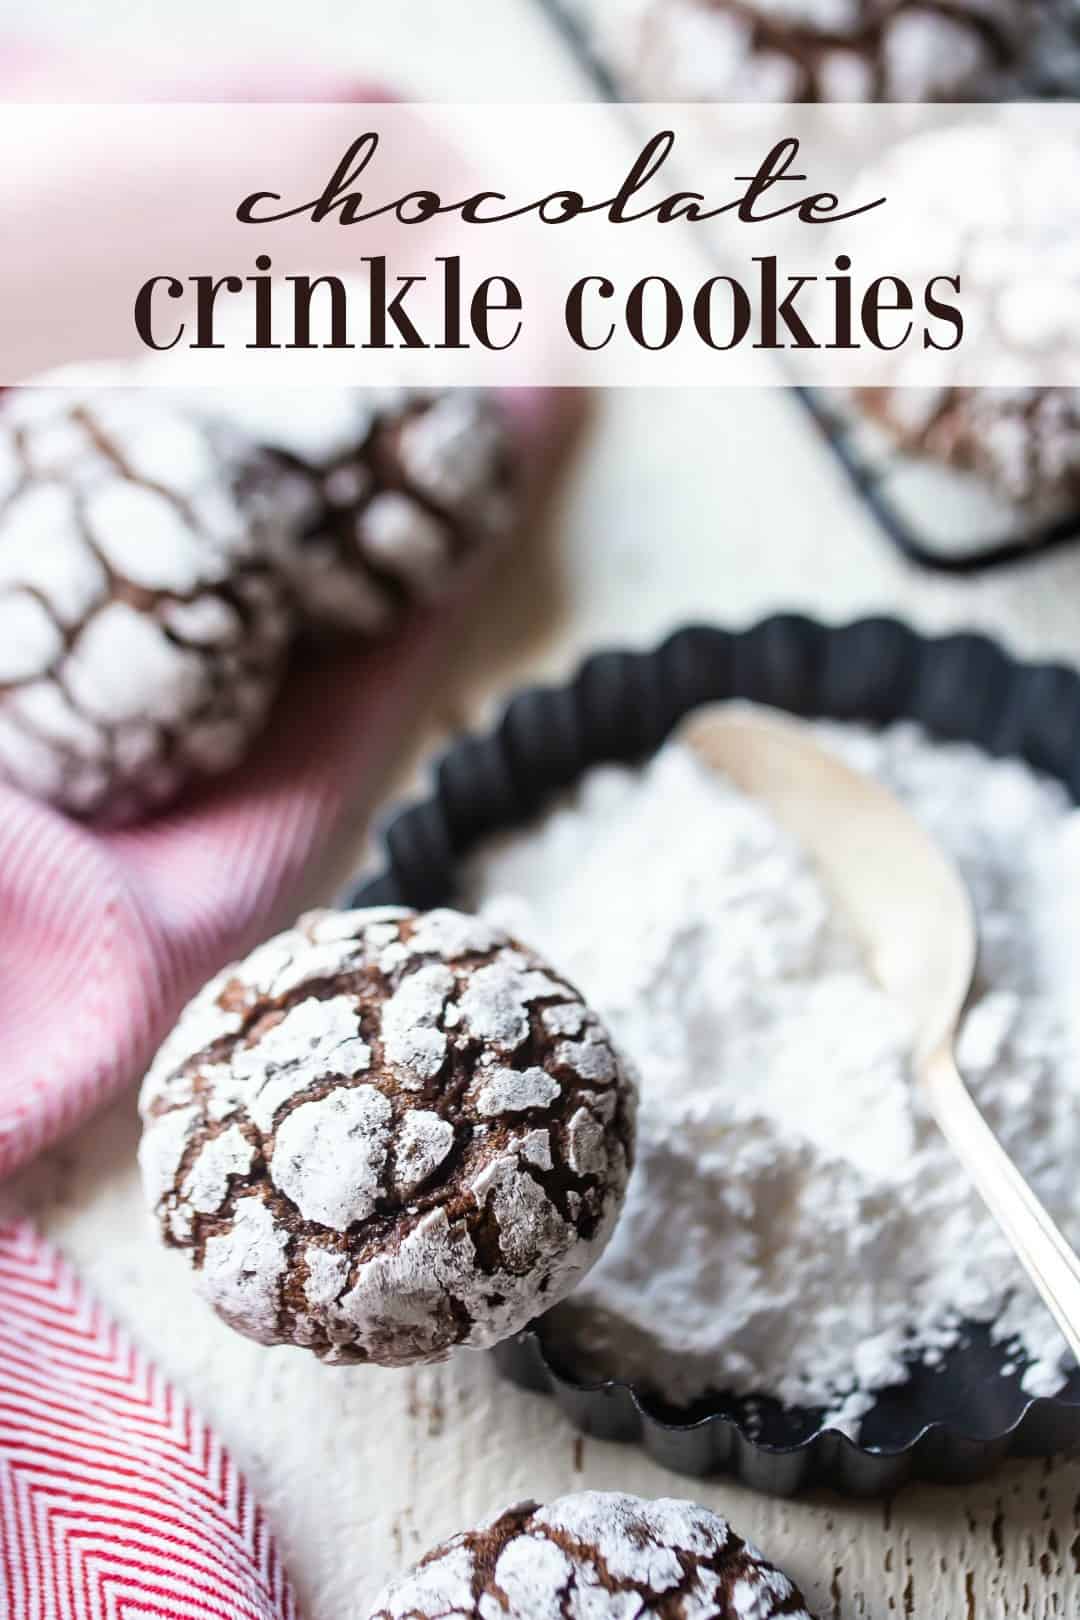 Chocolate crinkle cookies on a dish of powdered sugar with a vintage silver spoon and a text overlay above reading "Chocolate Crinkle Cookies."